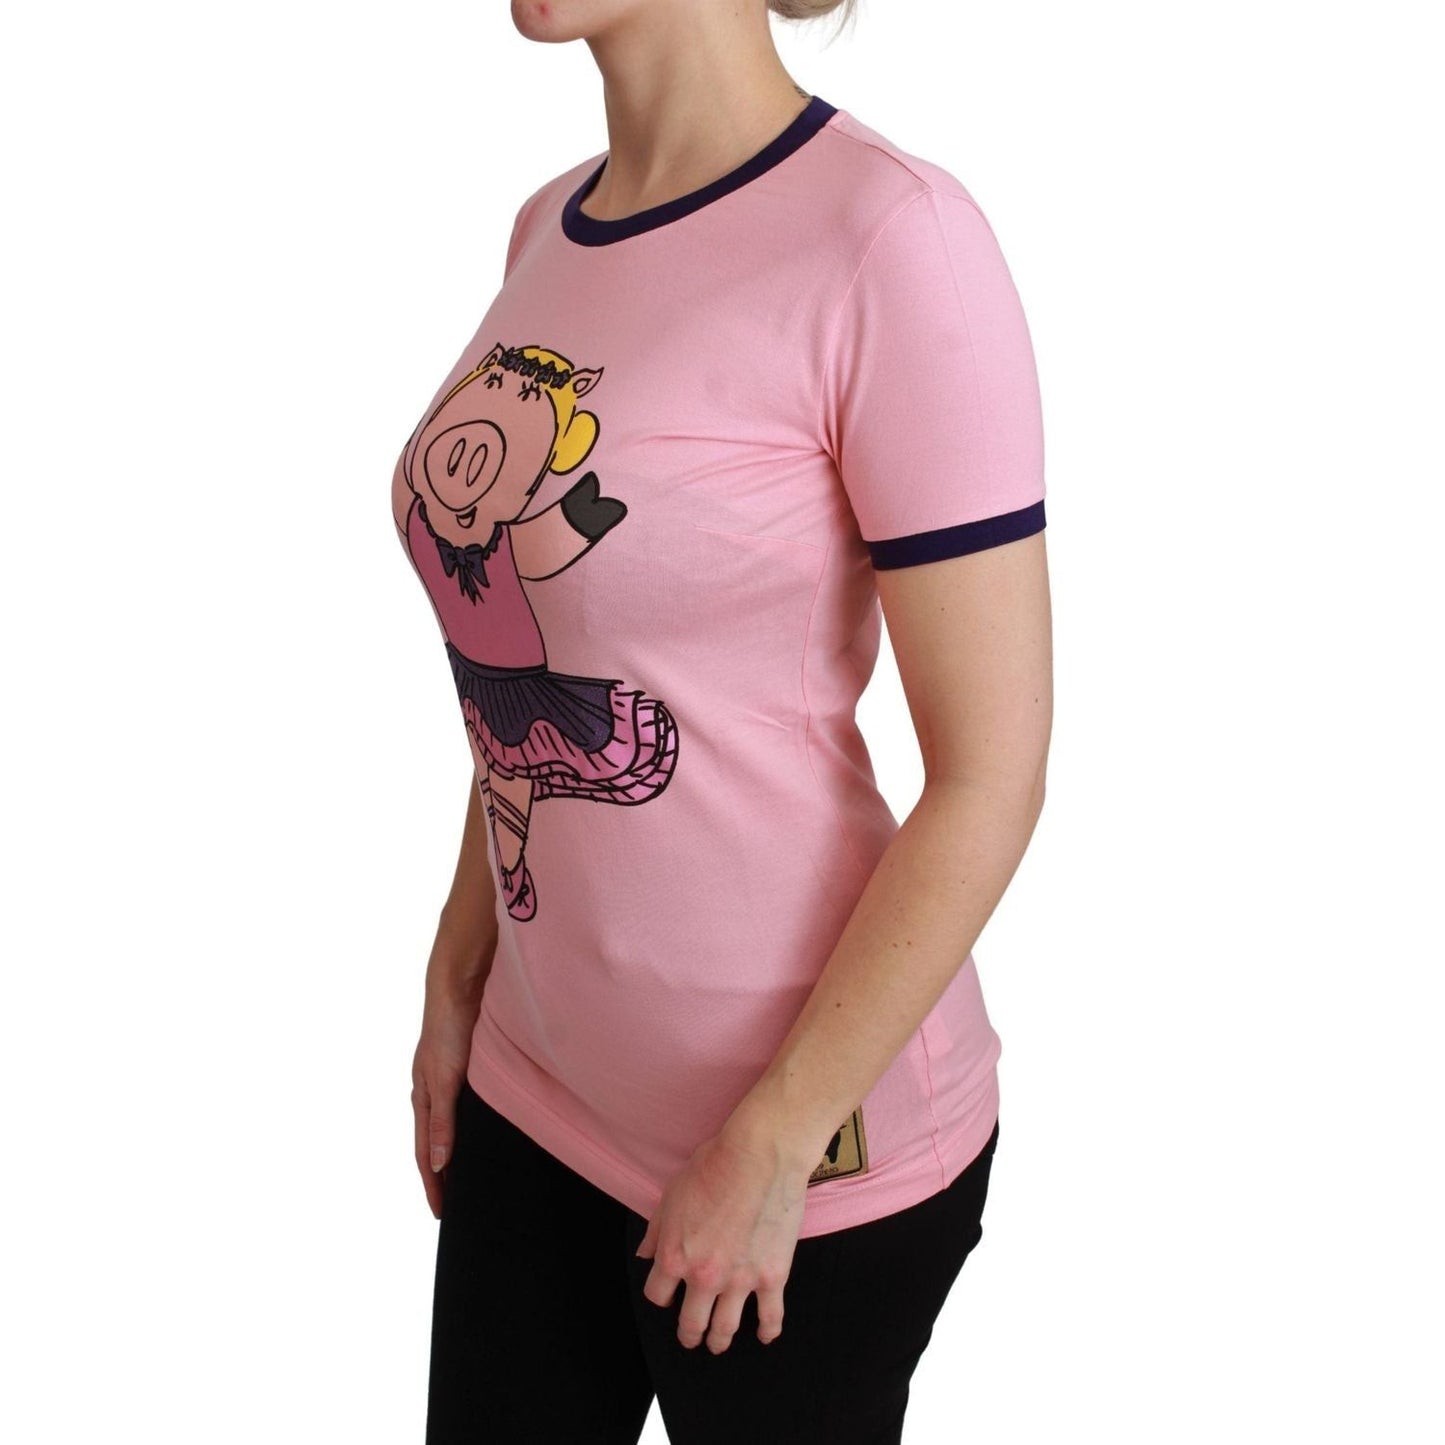 Dolce & Gabbana Pink Crewneck Year of the Pig T-Shirt pink-year-of-the-pig-top-cotton-t-shirt